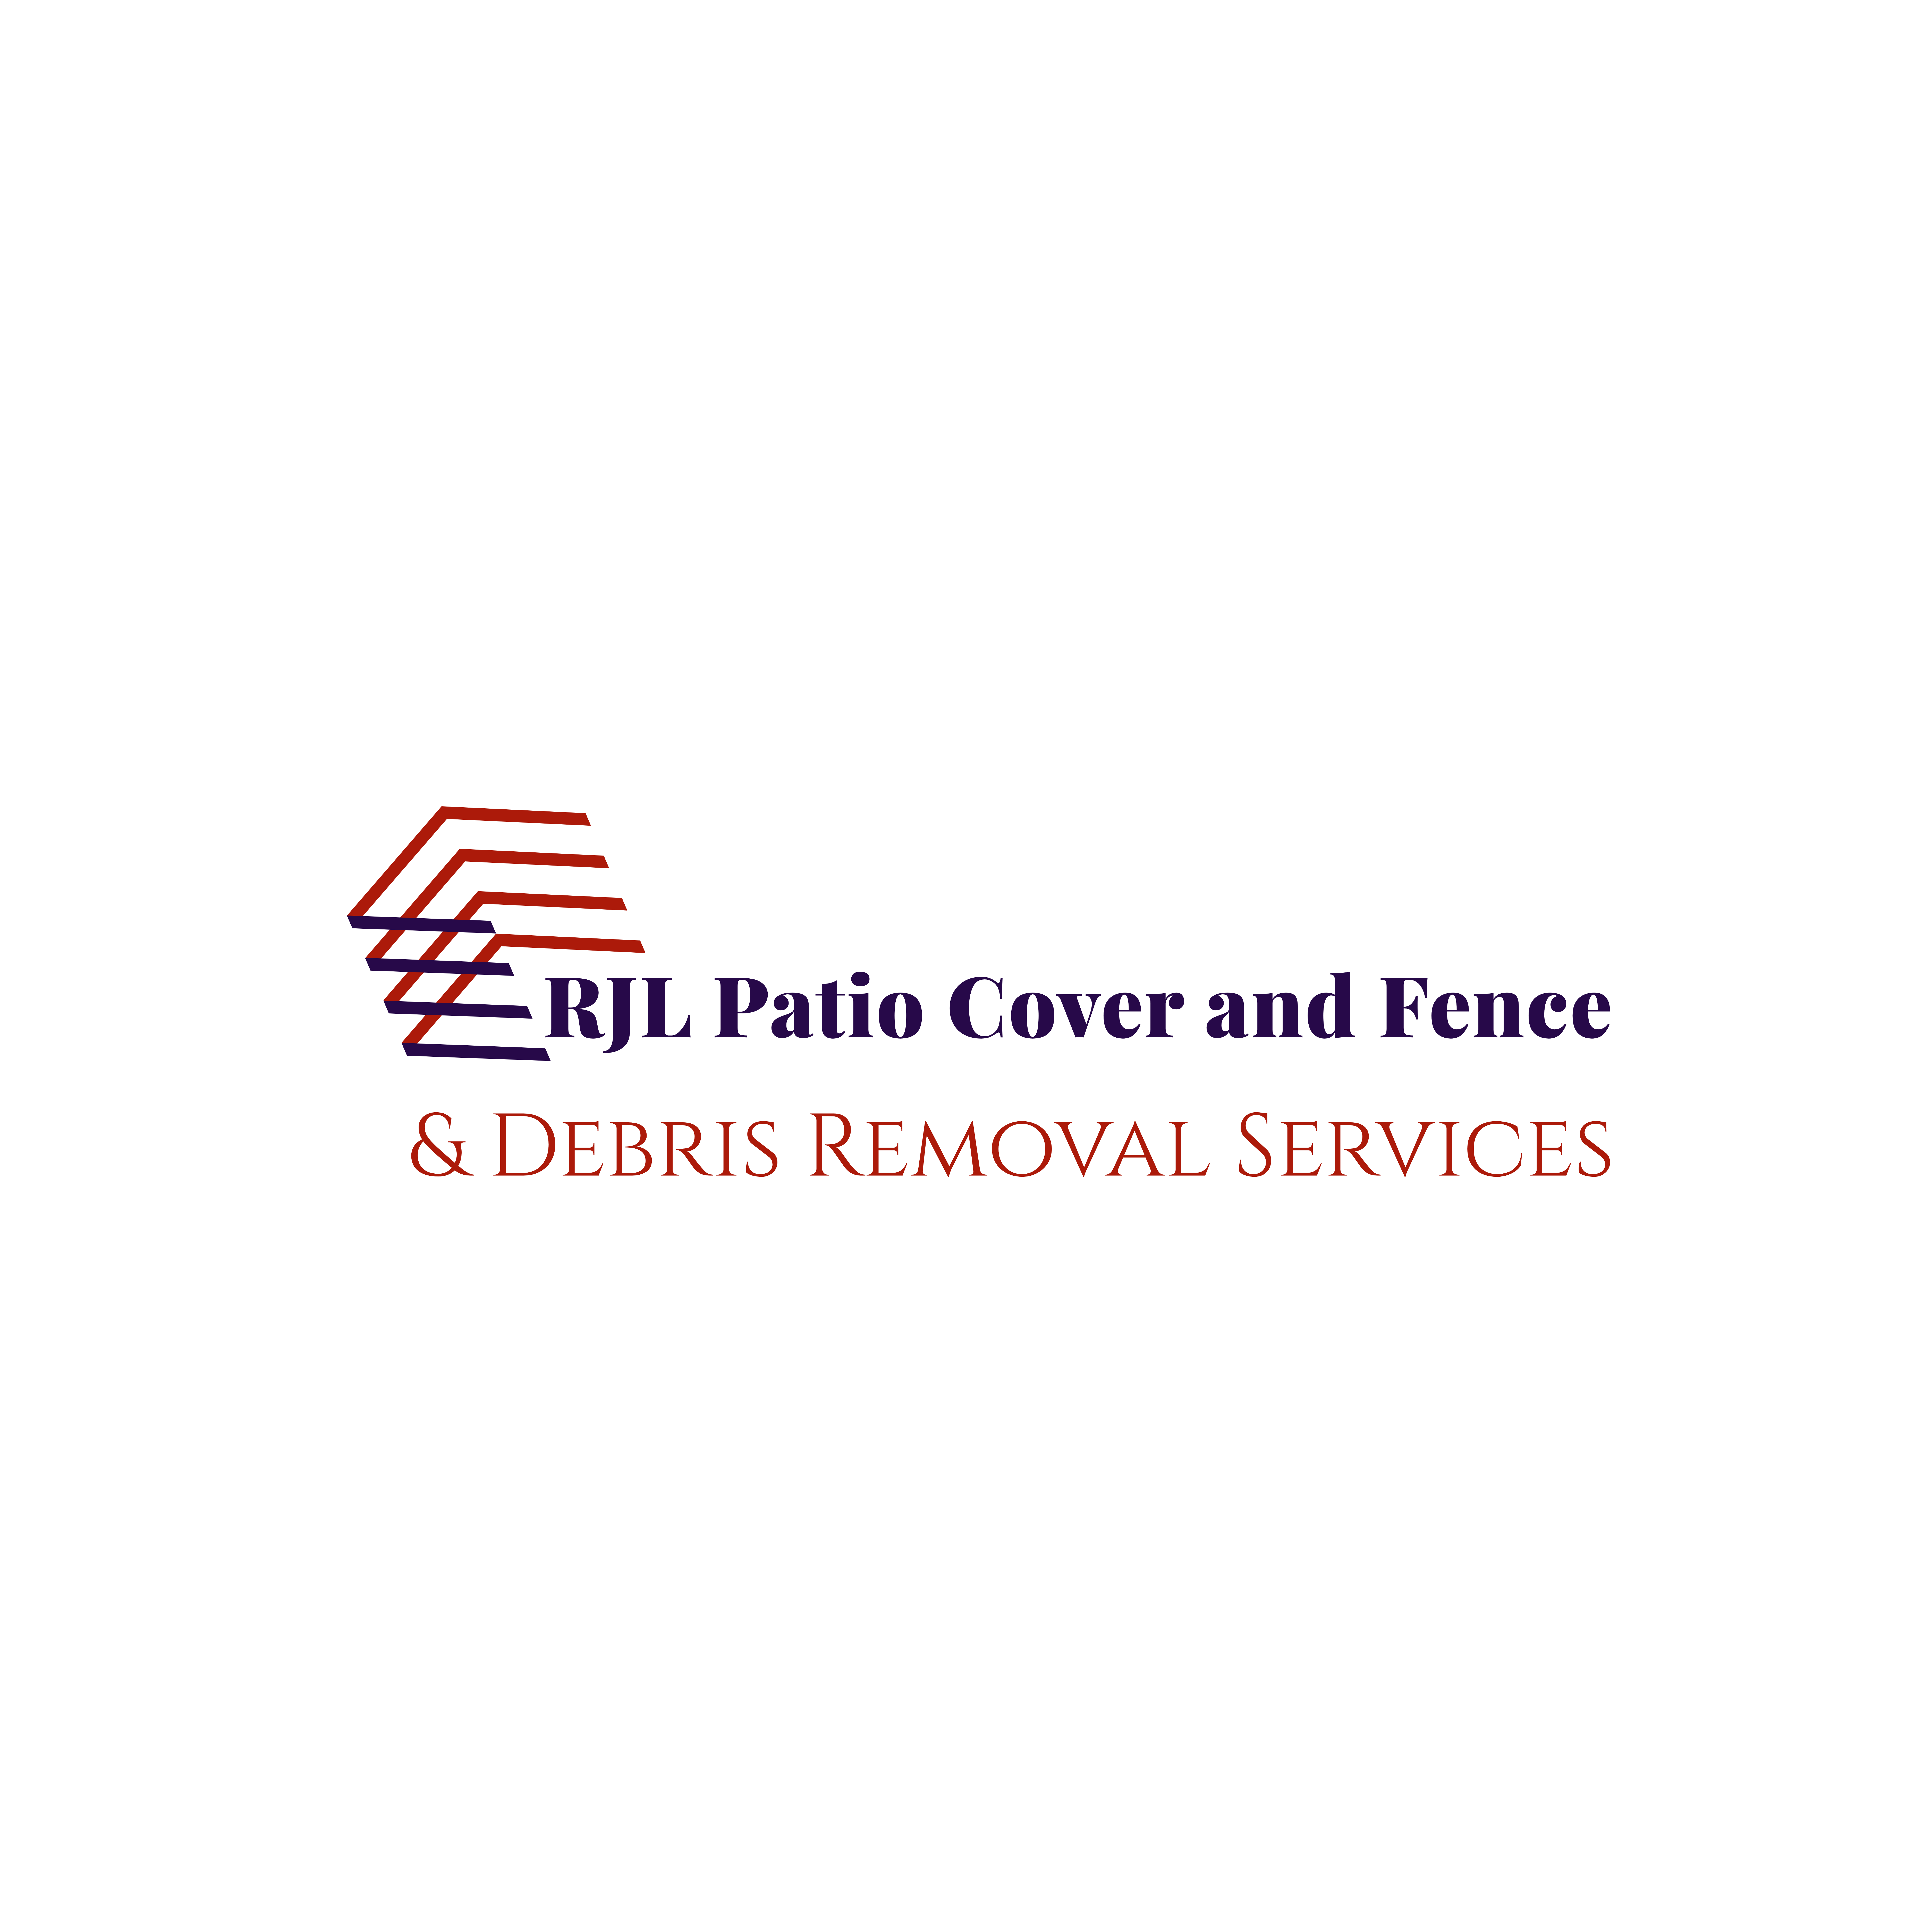 RJL Patio Cover and Fence Logo